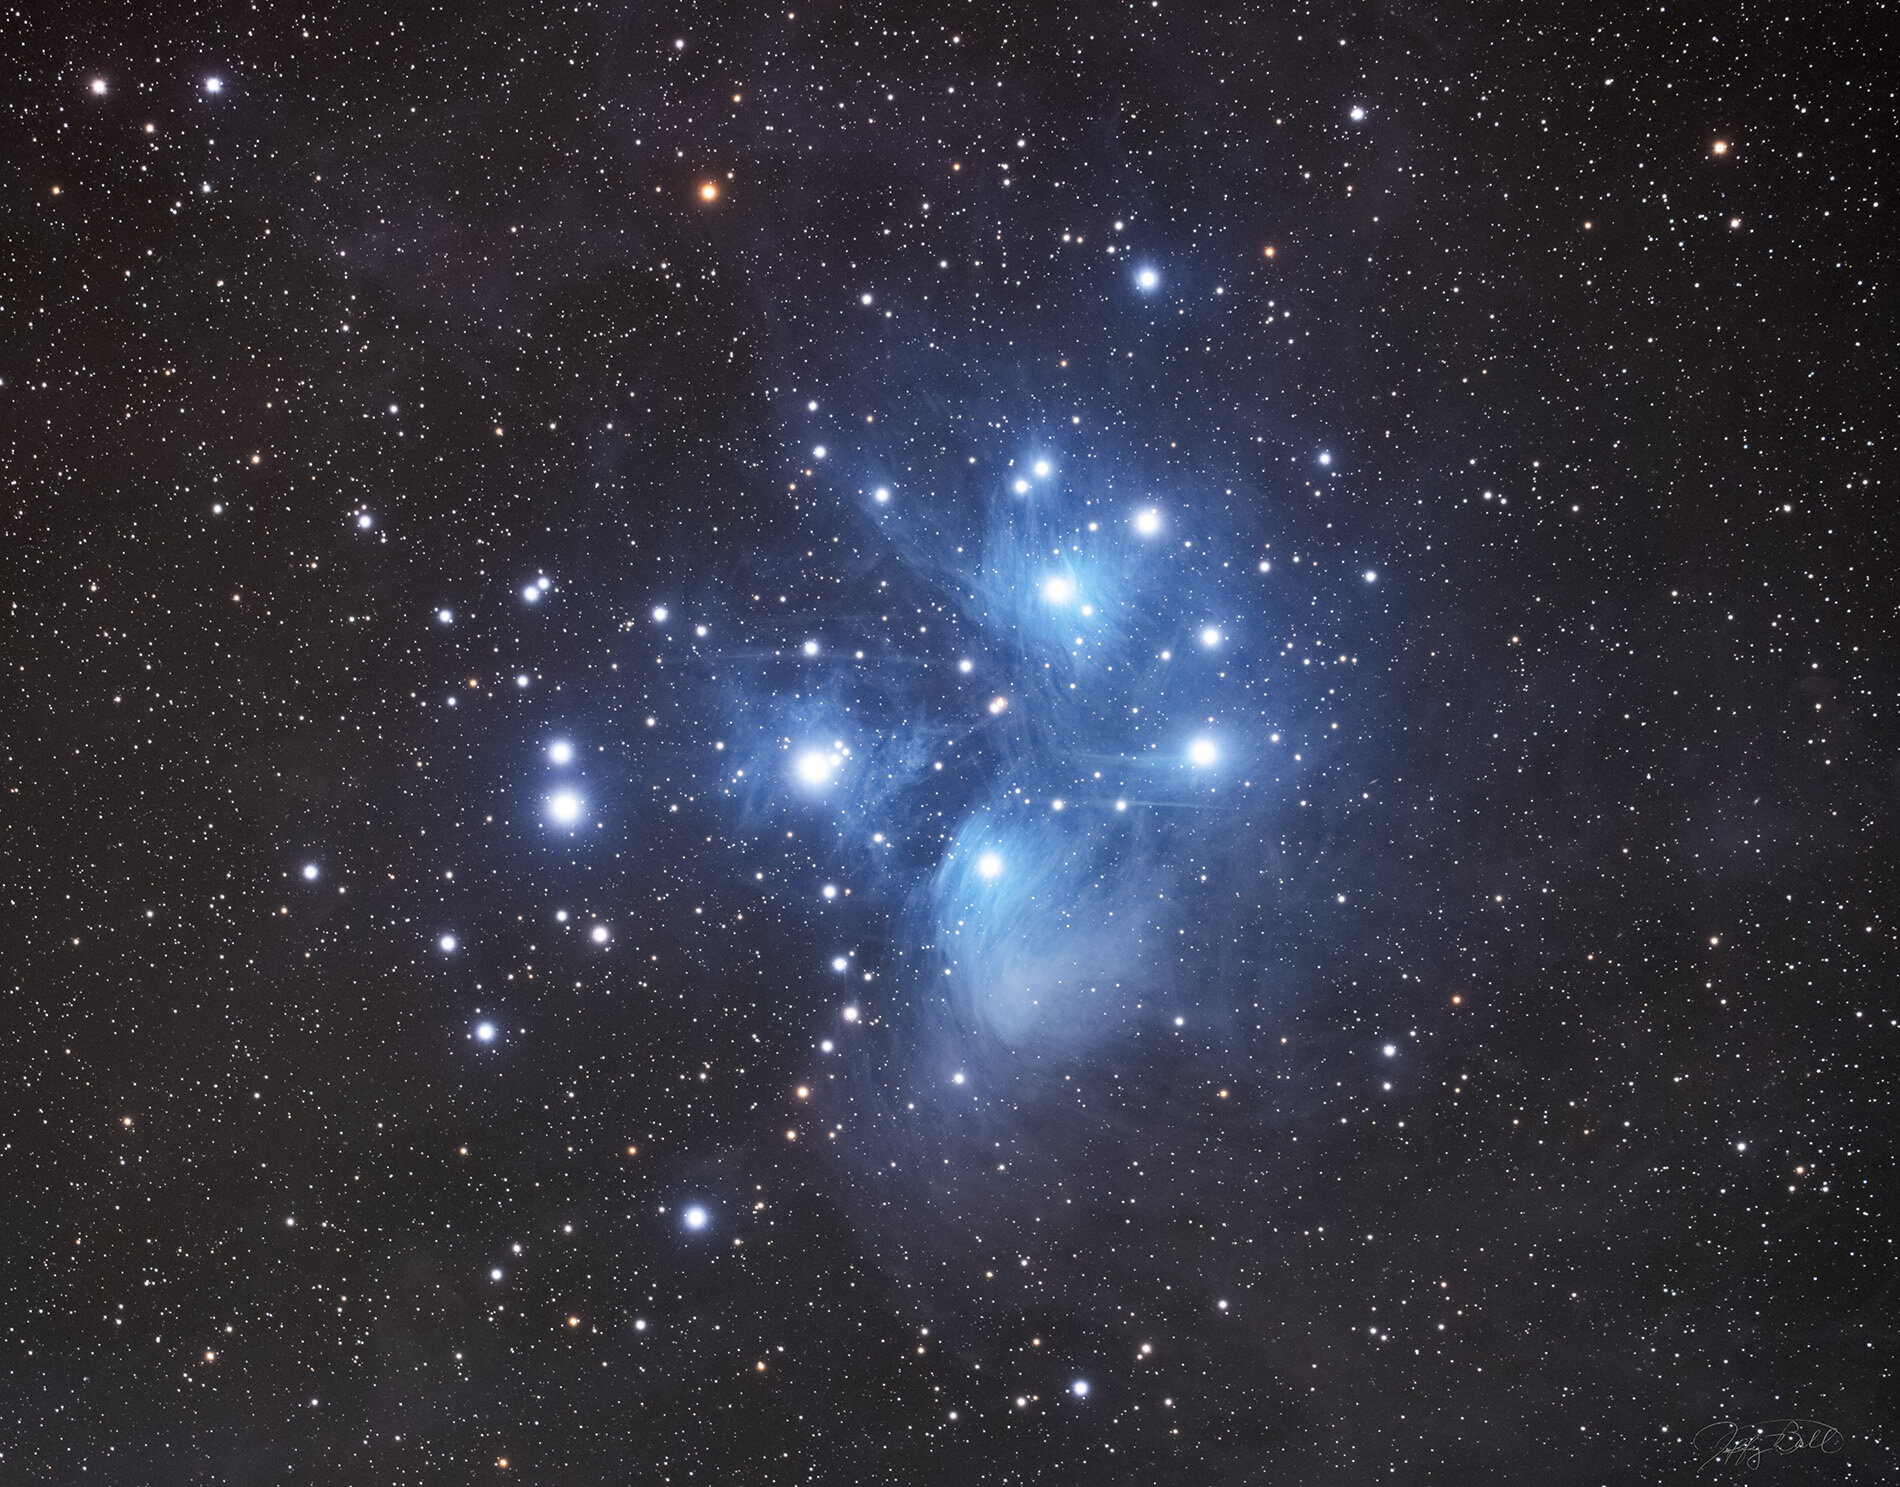 M45 Pleiades from Spruce Knob, WV.  See my Astrobin page for technical details.  